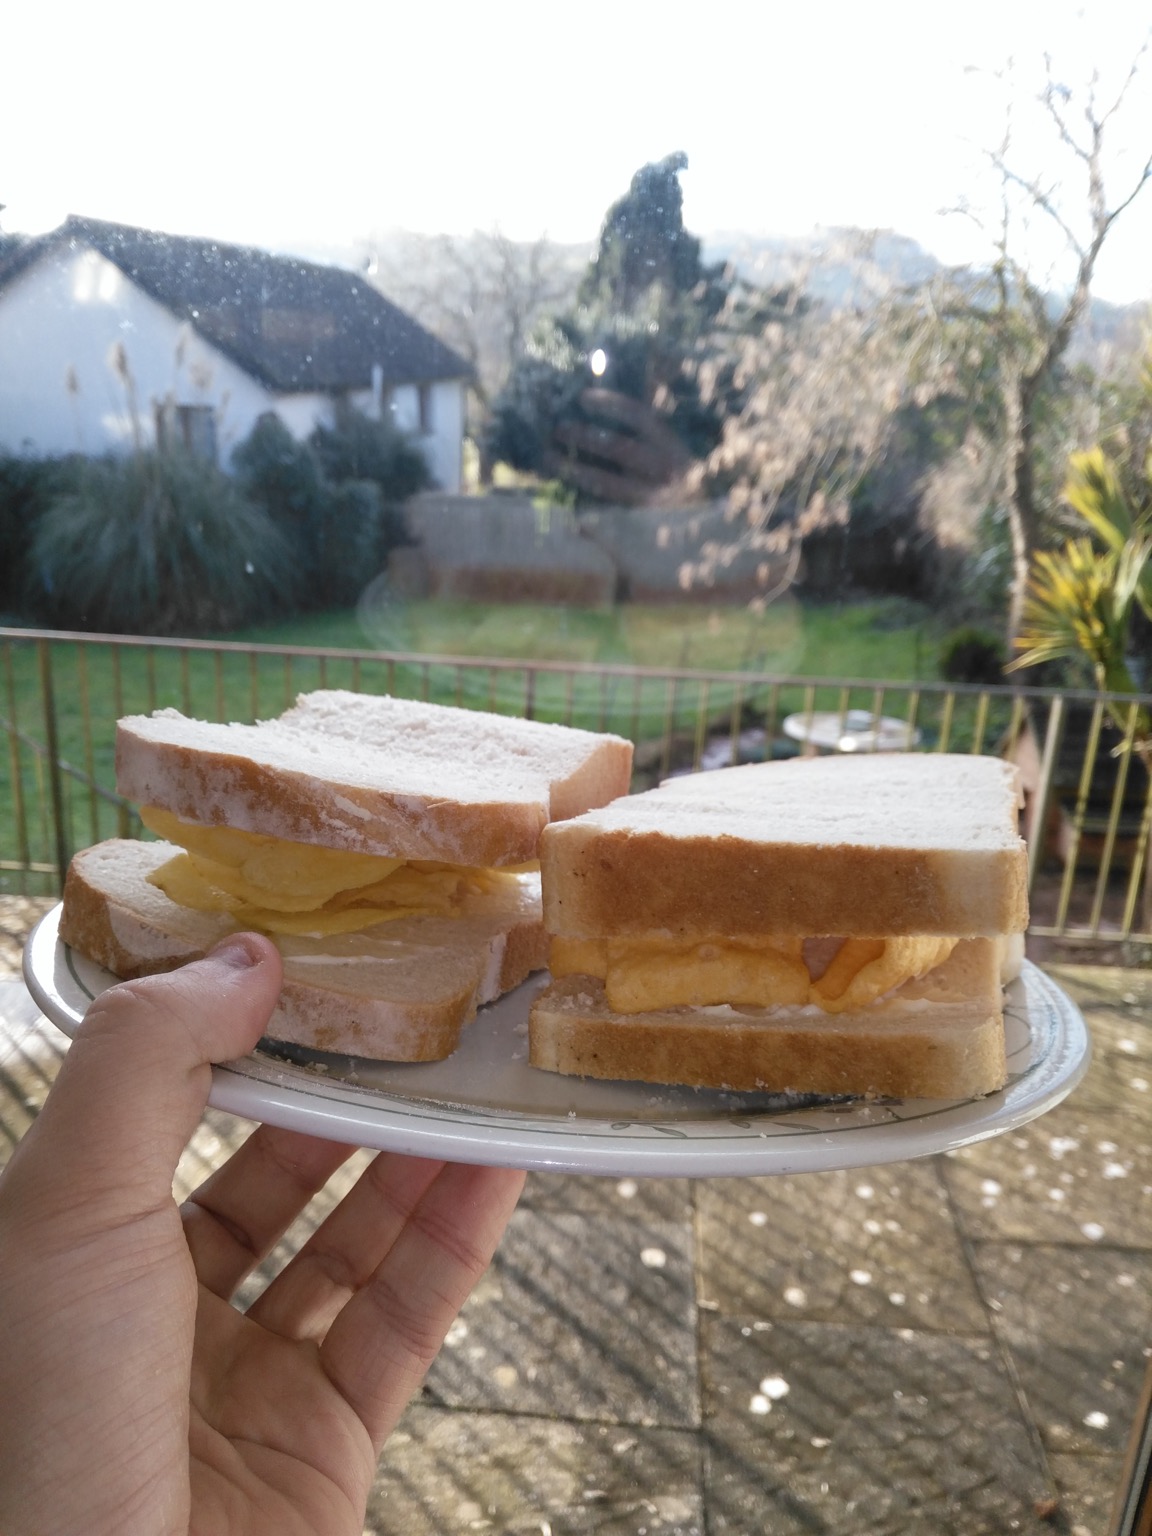 Taunting the neighbours with crisp sandwiches